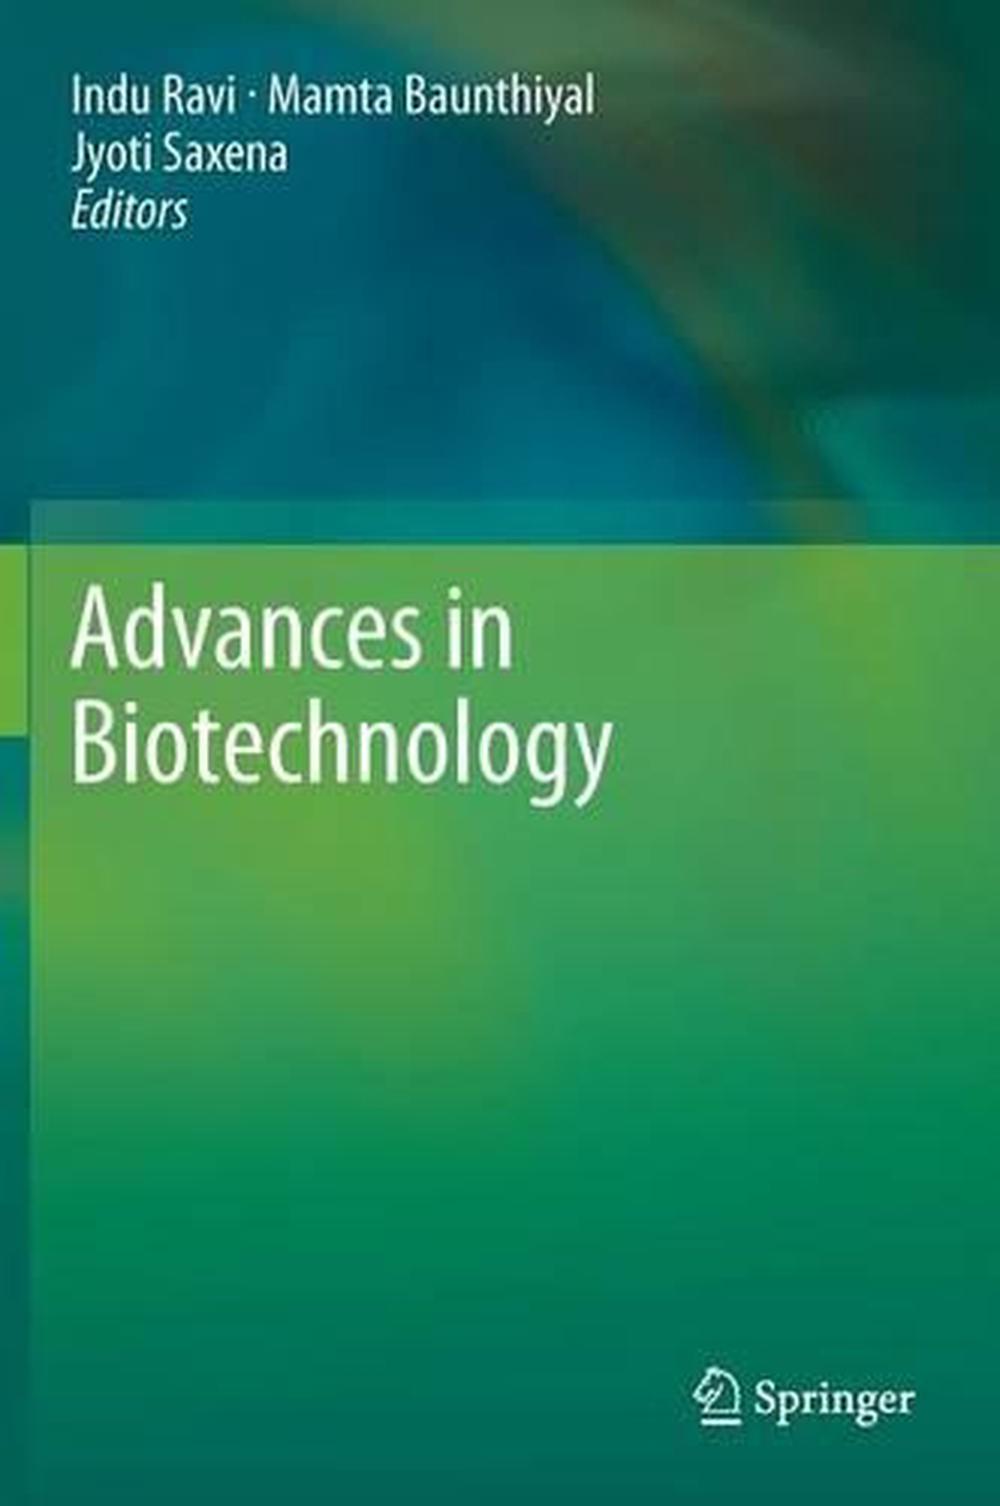 Advances in Biotechnology (English) Hardcover Book Free Shipping